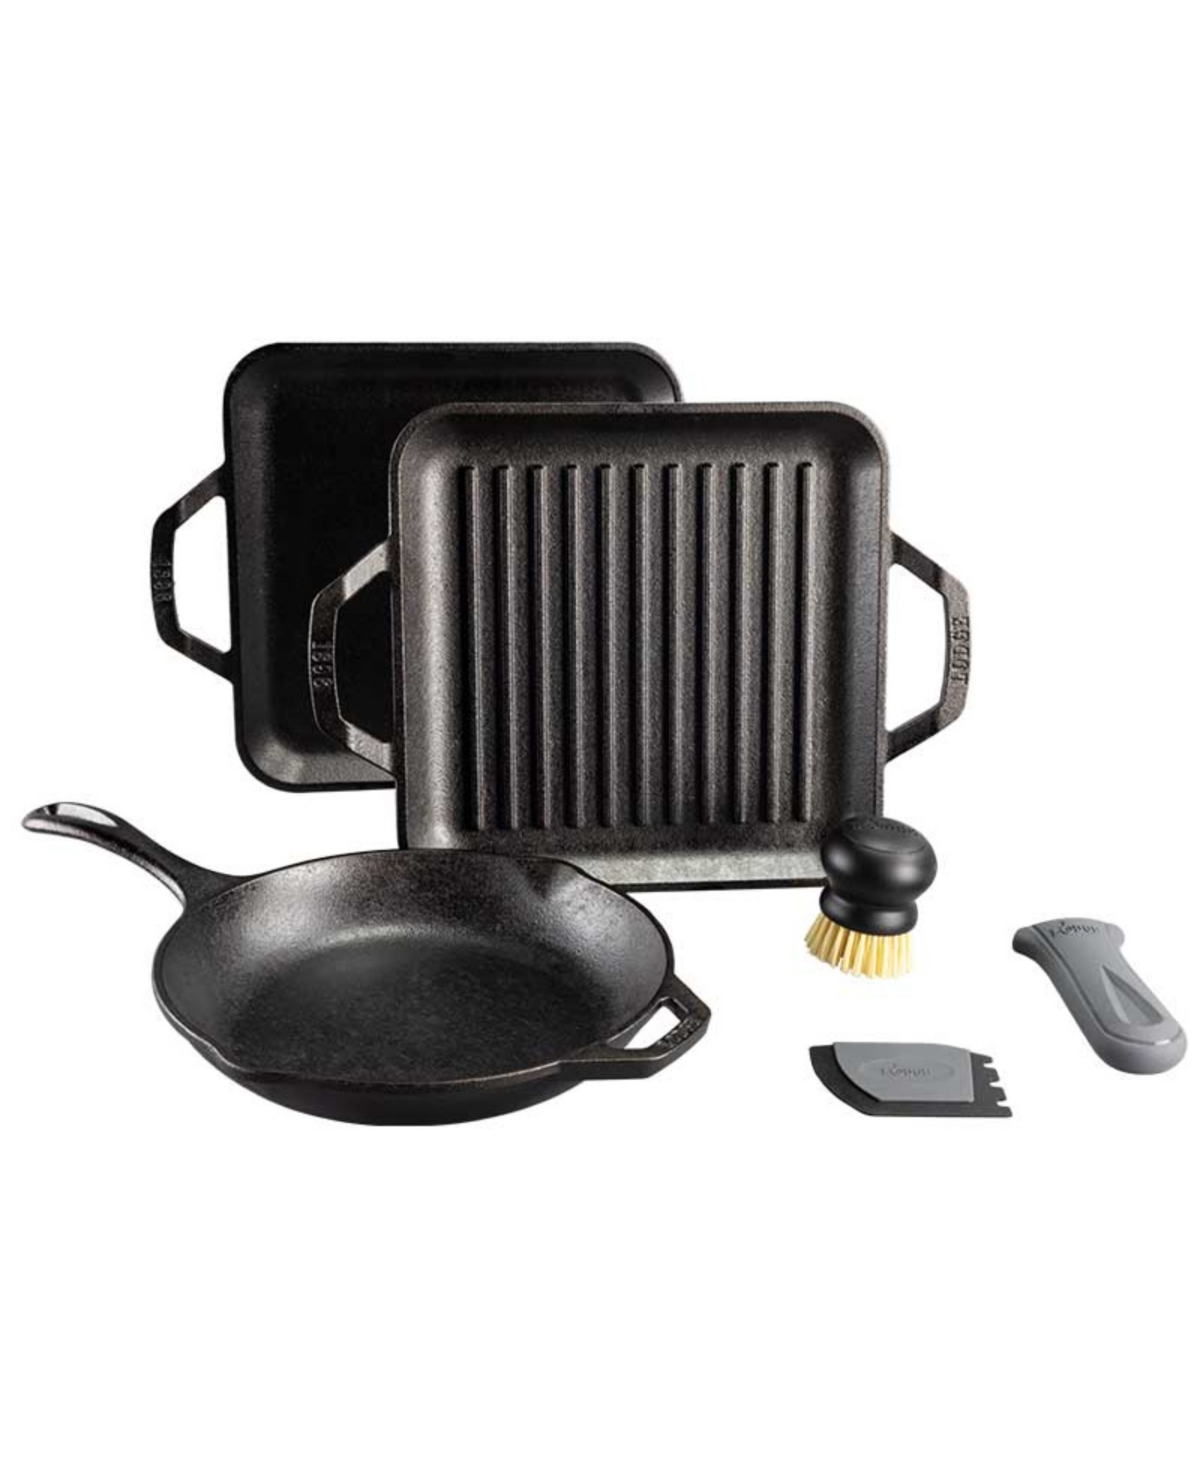 Lodge Cast Iron Chef Collection 12" Gourmet Cookware Set In Black